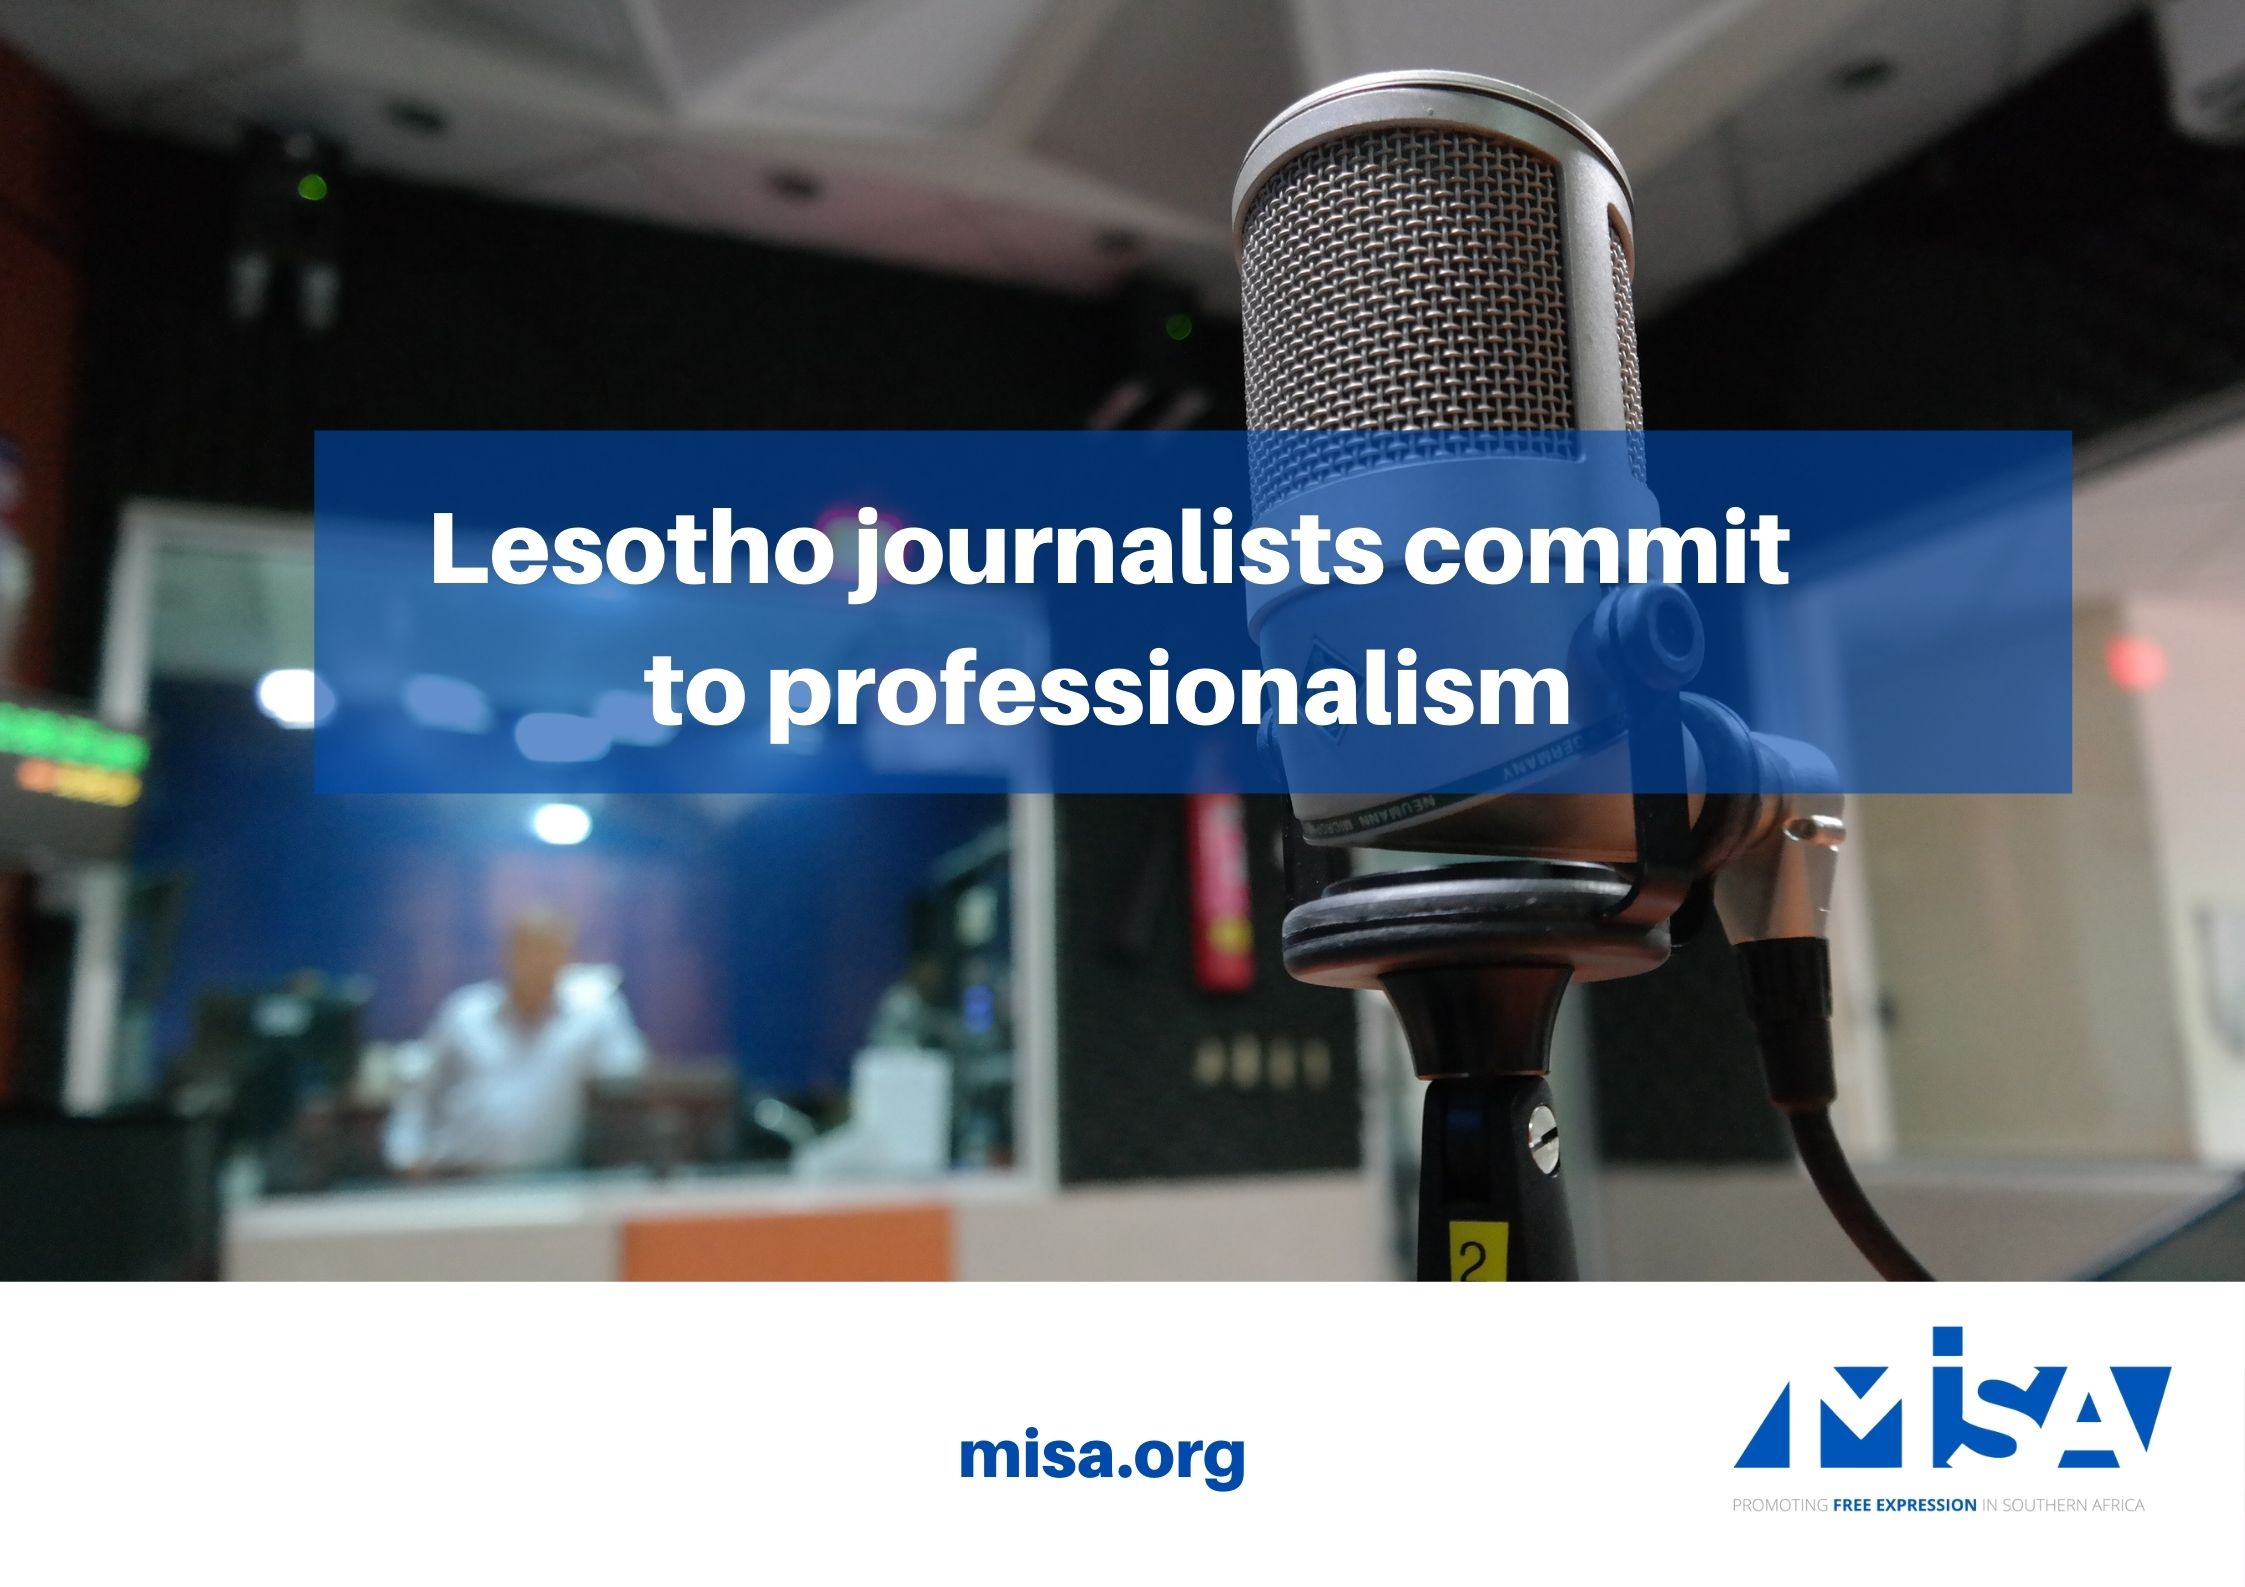 Lesotho journalists commit to professionalism